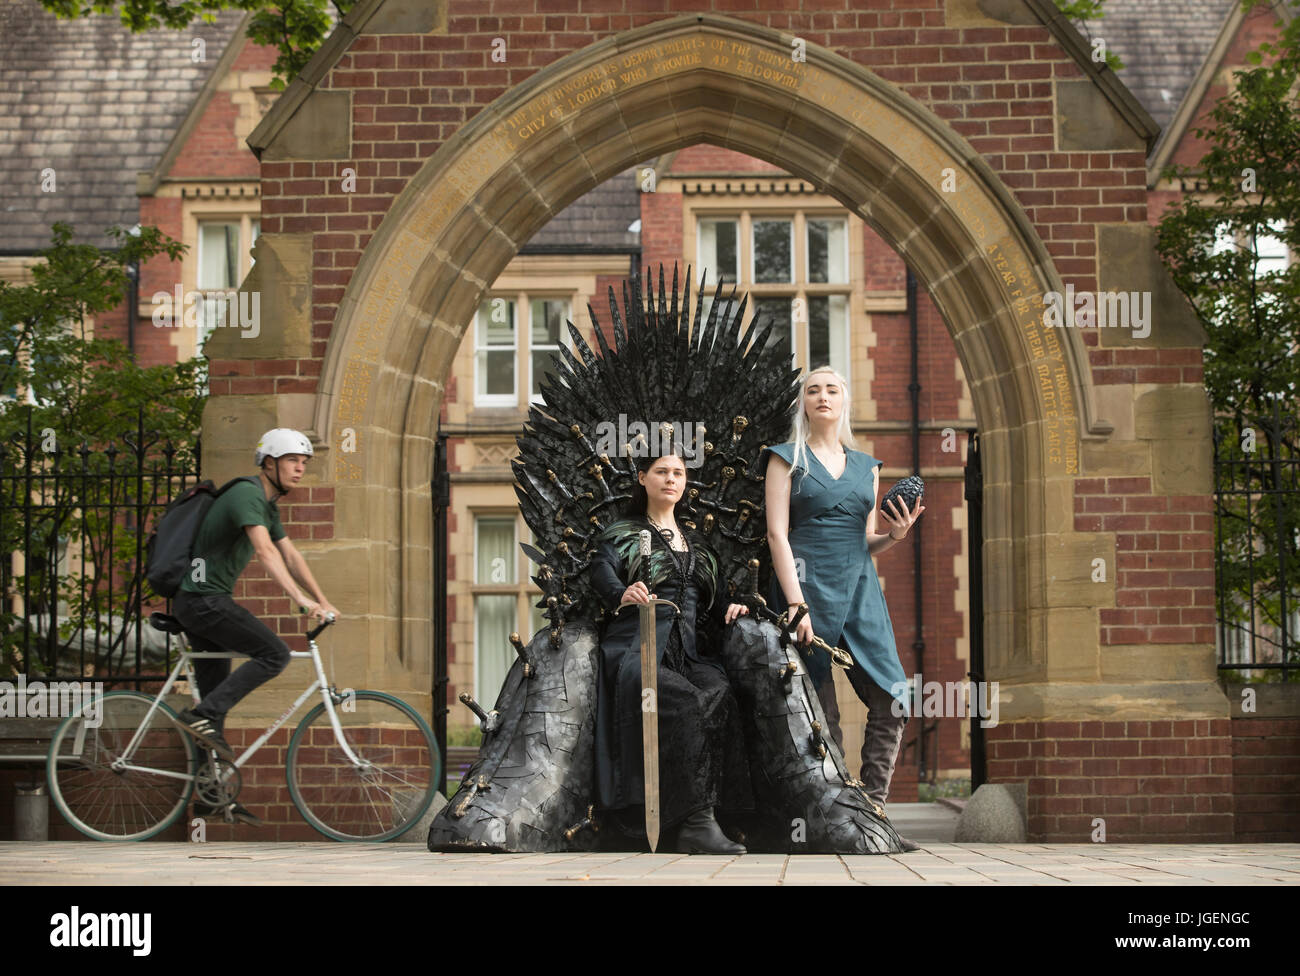 Susan Broadbent (left) dressed as Sansa Stark and Georgina Lambert dressed as Daenerys Targaryen with a replica of the throne made famous by TV's Game of Thrones during the International Medieval Congress at Leeds University. Stock Photo